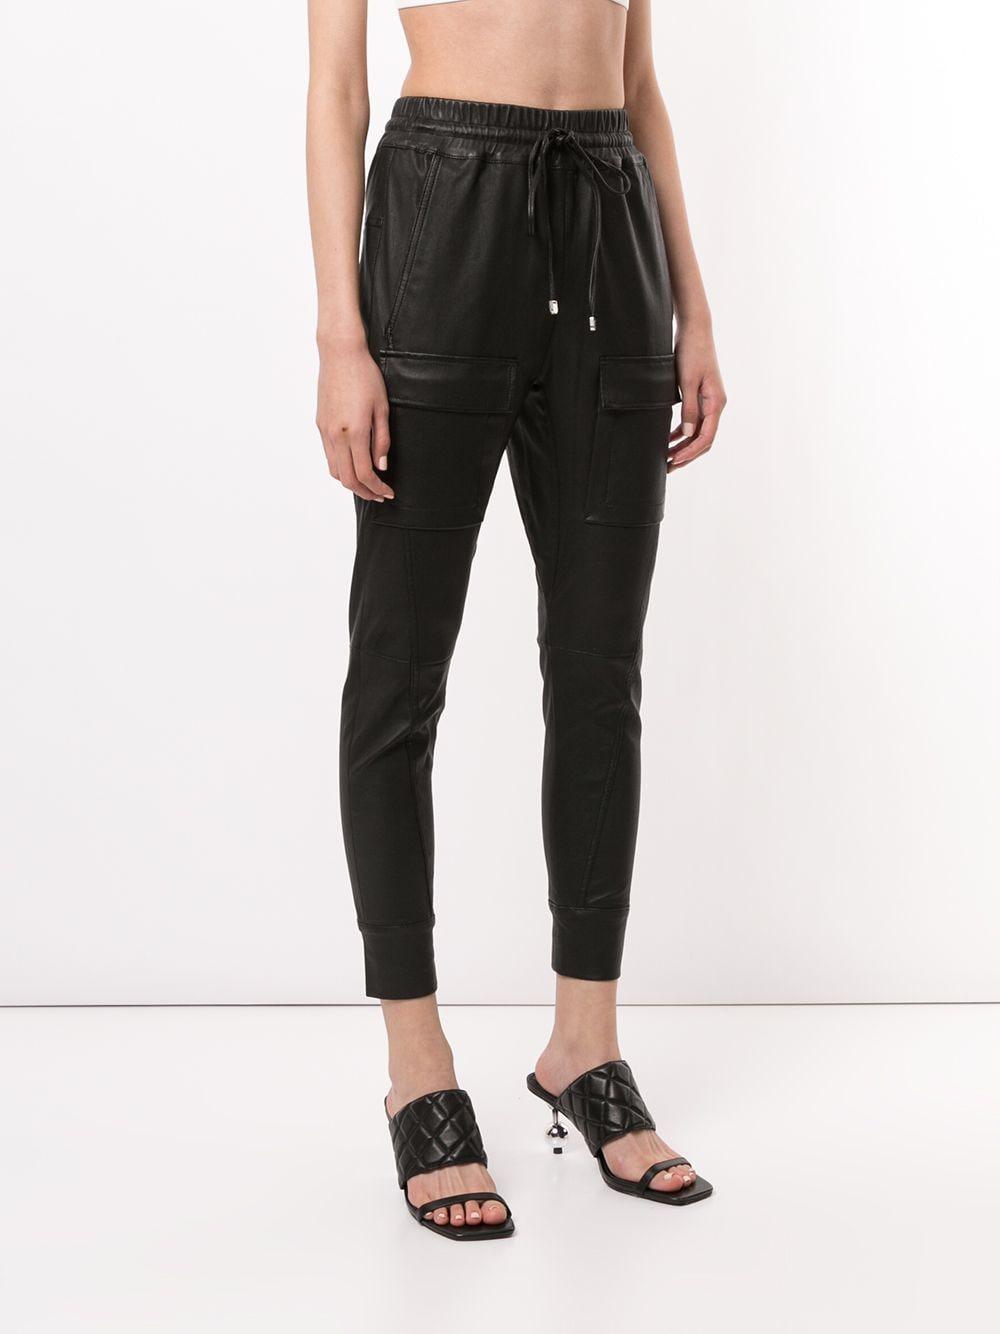 Manning Cartell Leather Open Season Trousers in Black - Lyst